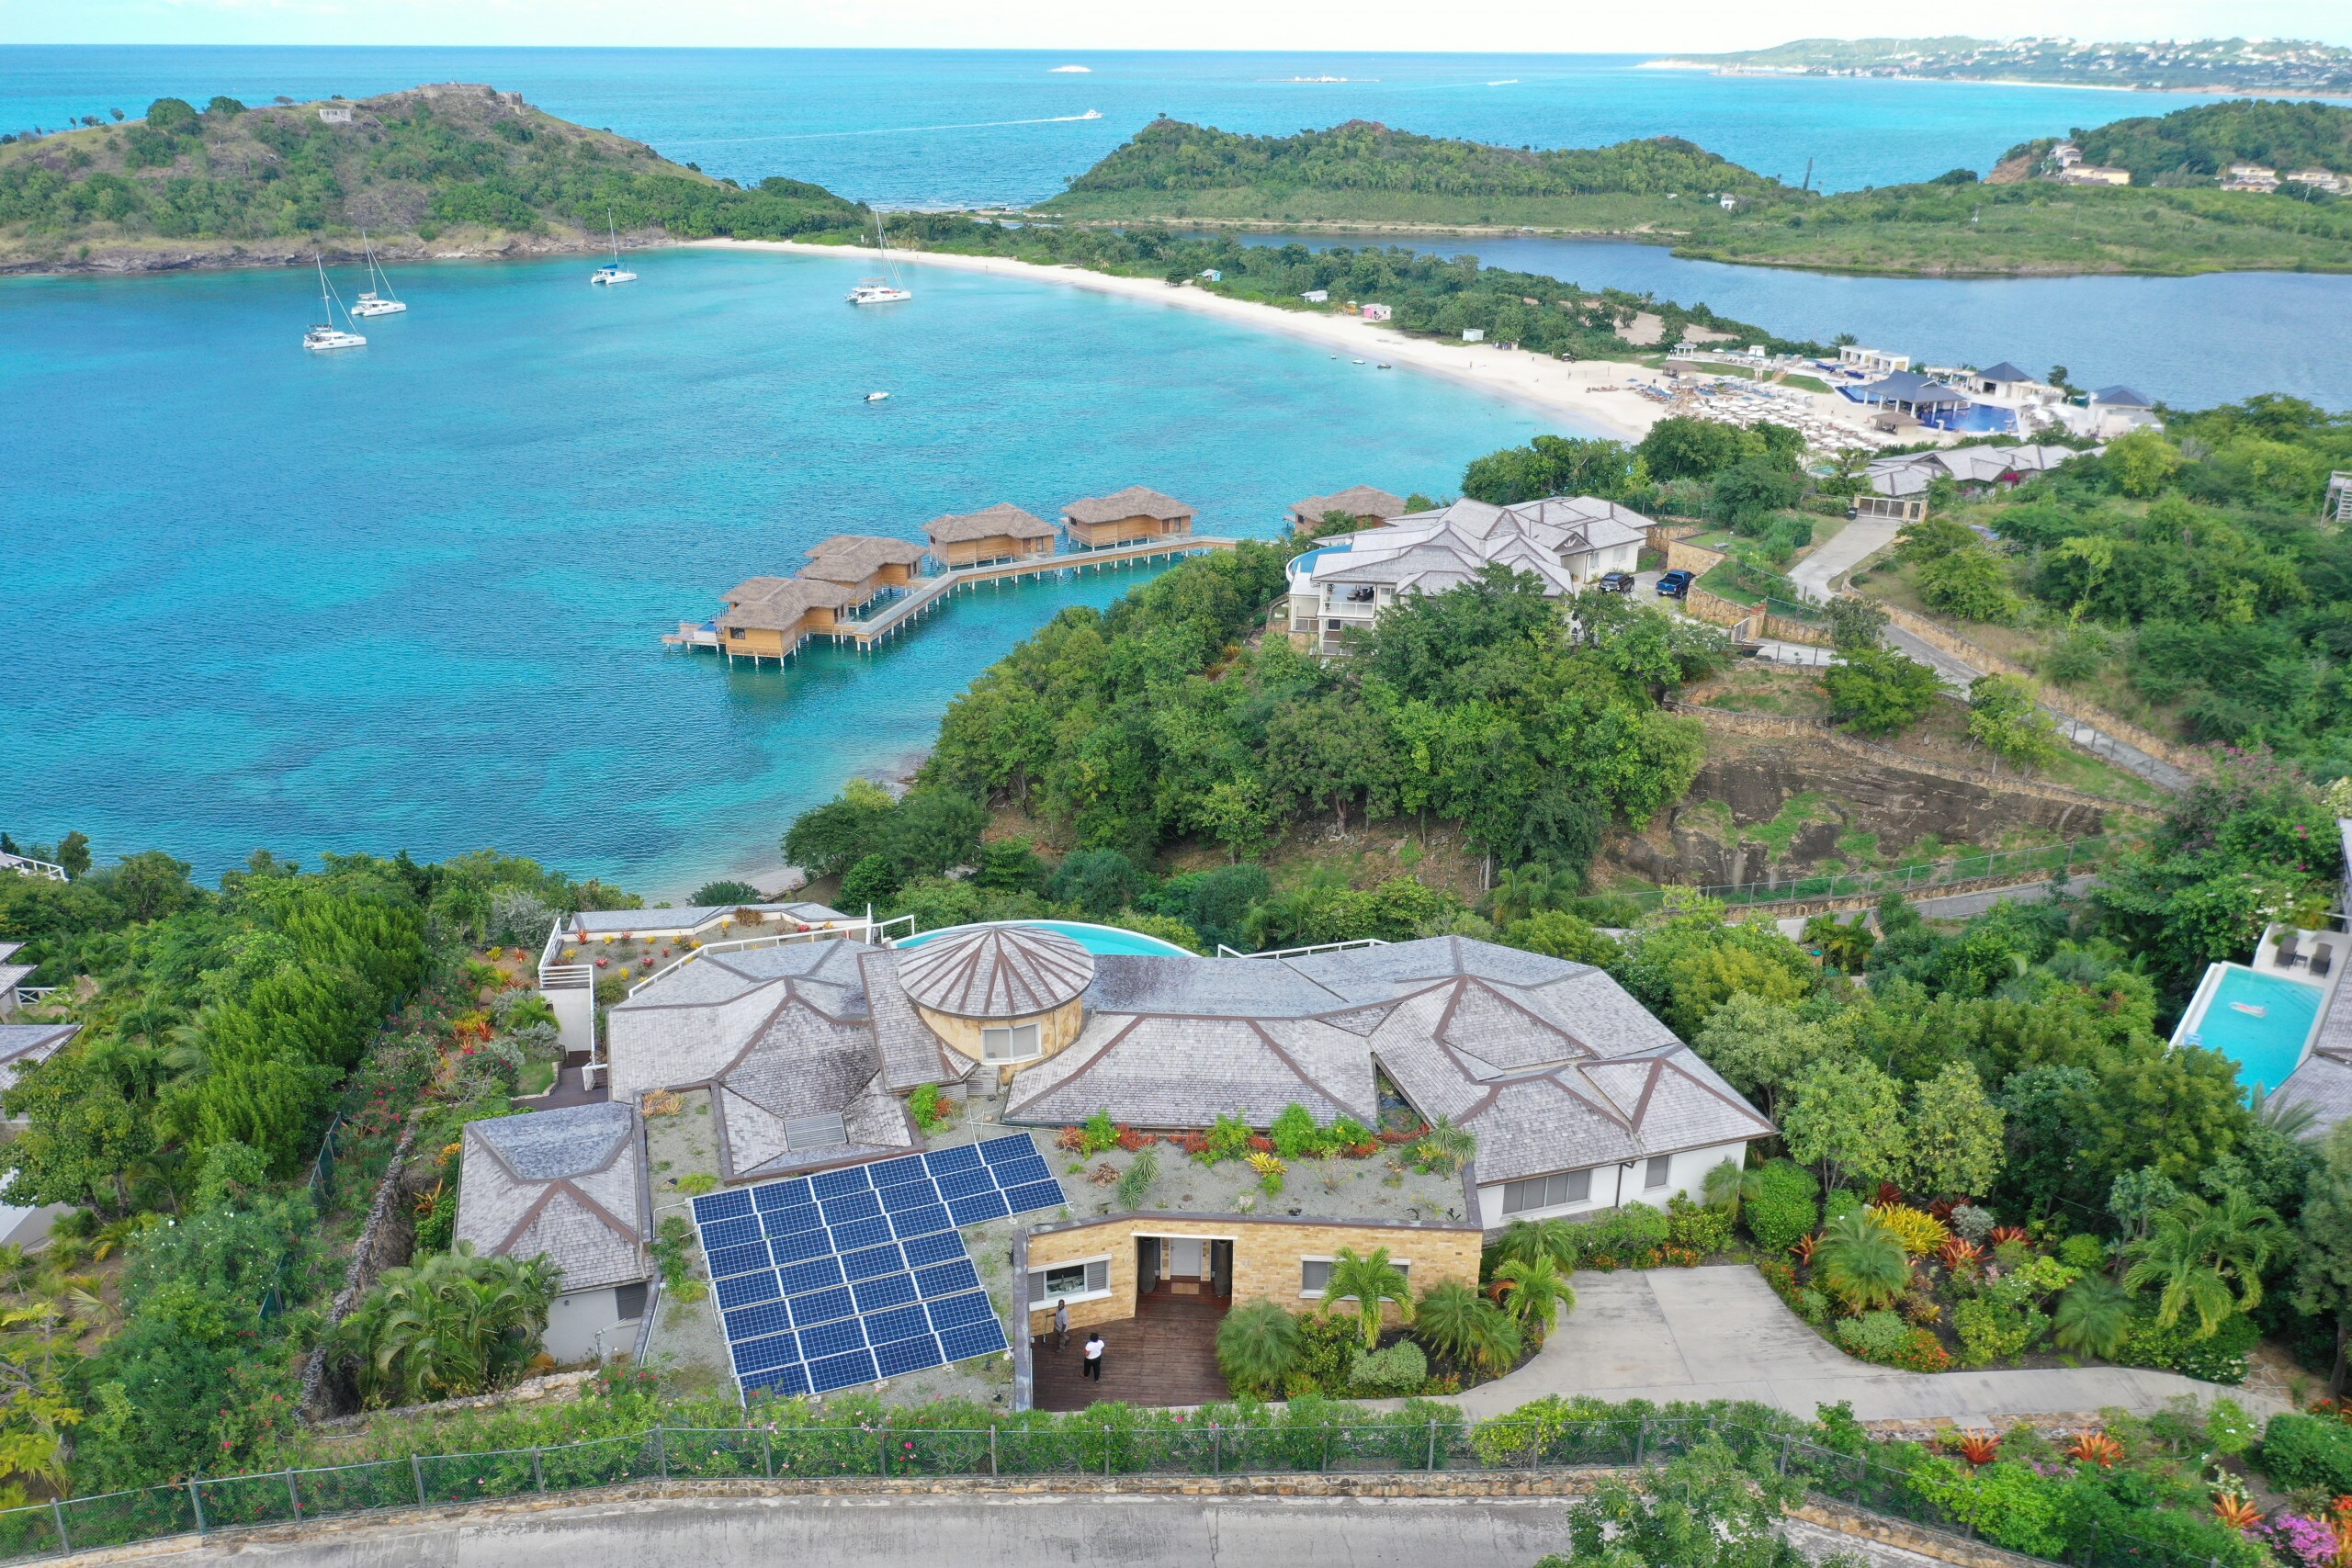 Beautiful large modern family home, private pool, six bedroom, Holiday rental at Galley Bay, Antigua 